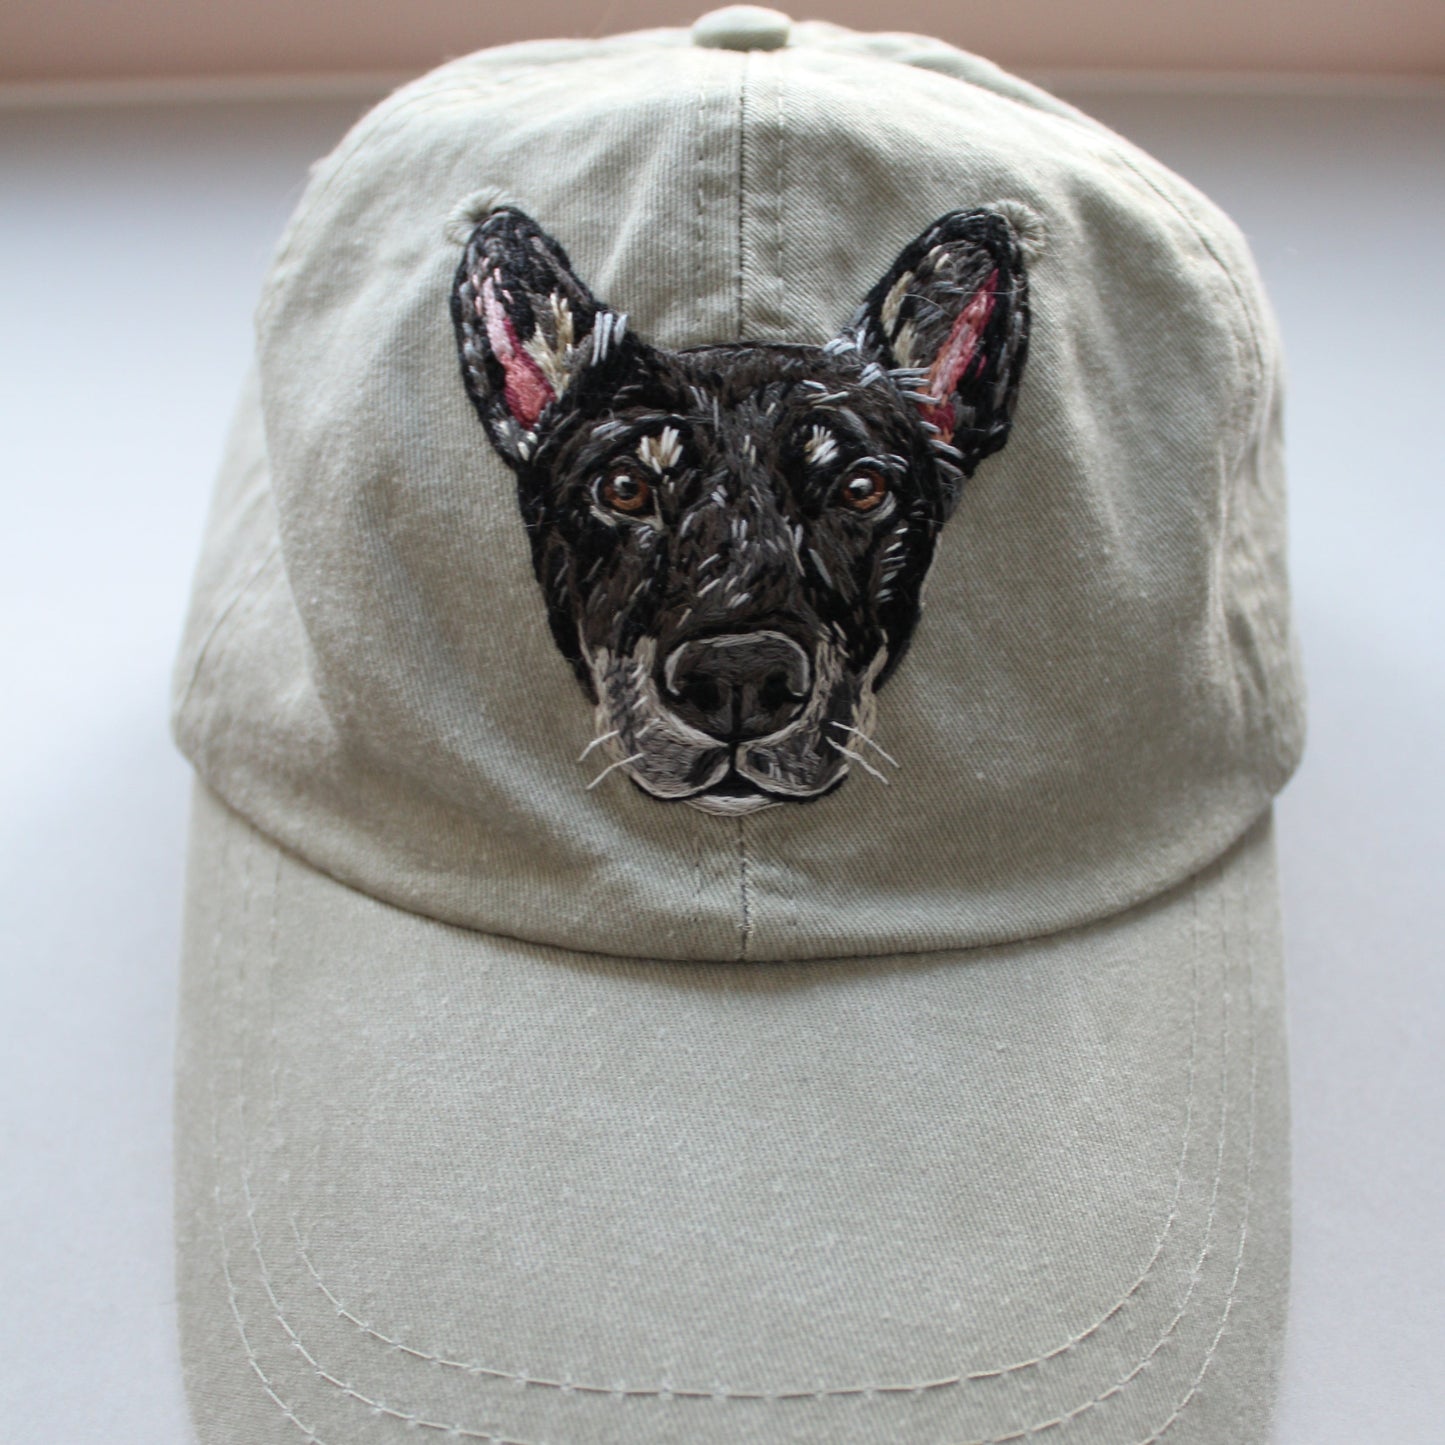 Dog embroidery on a hat